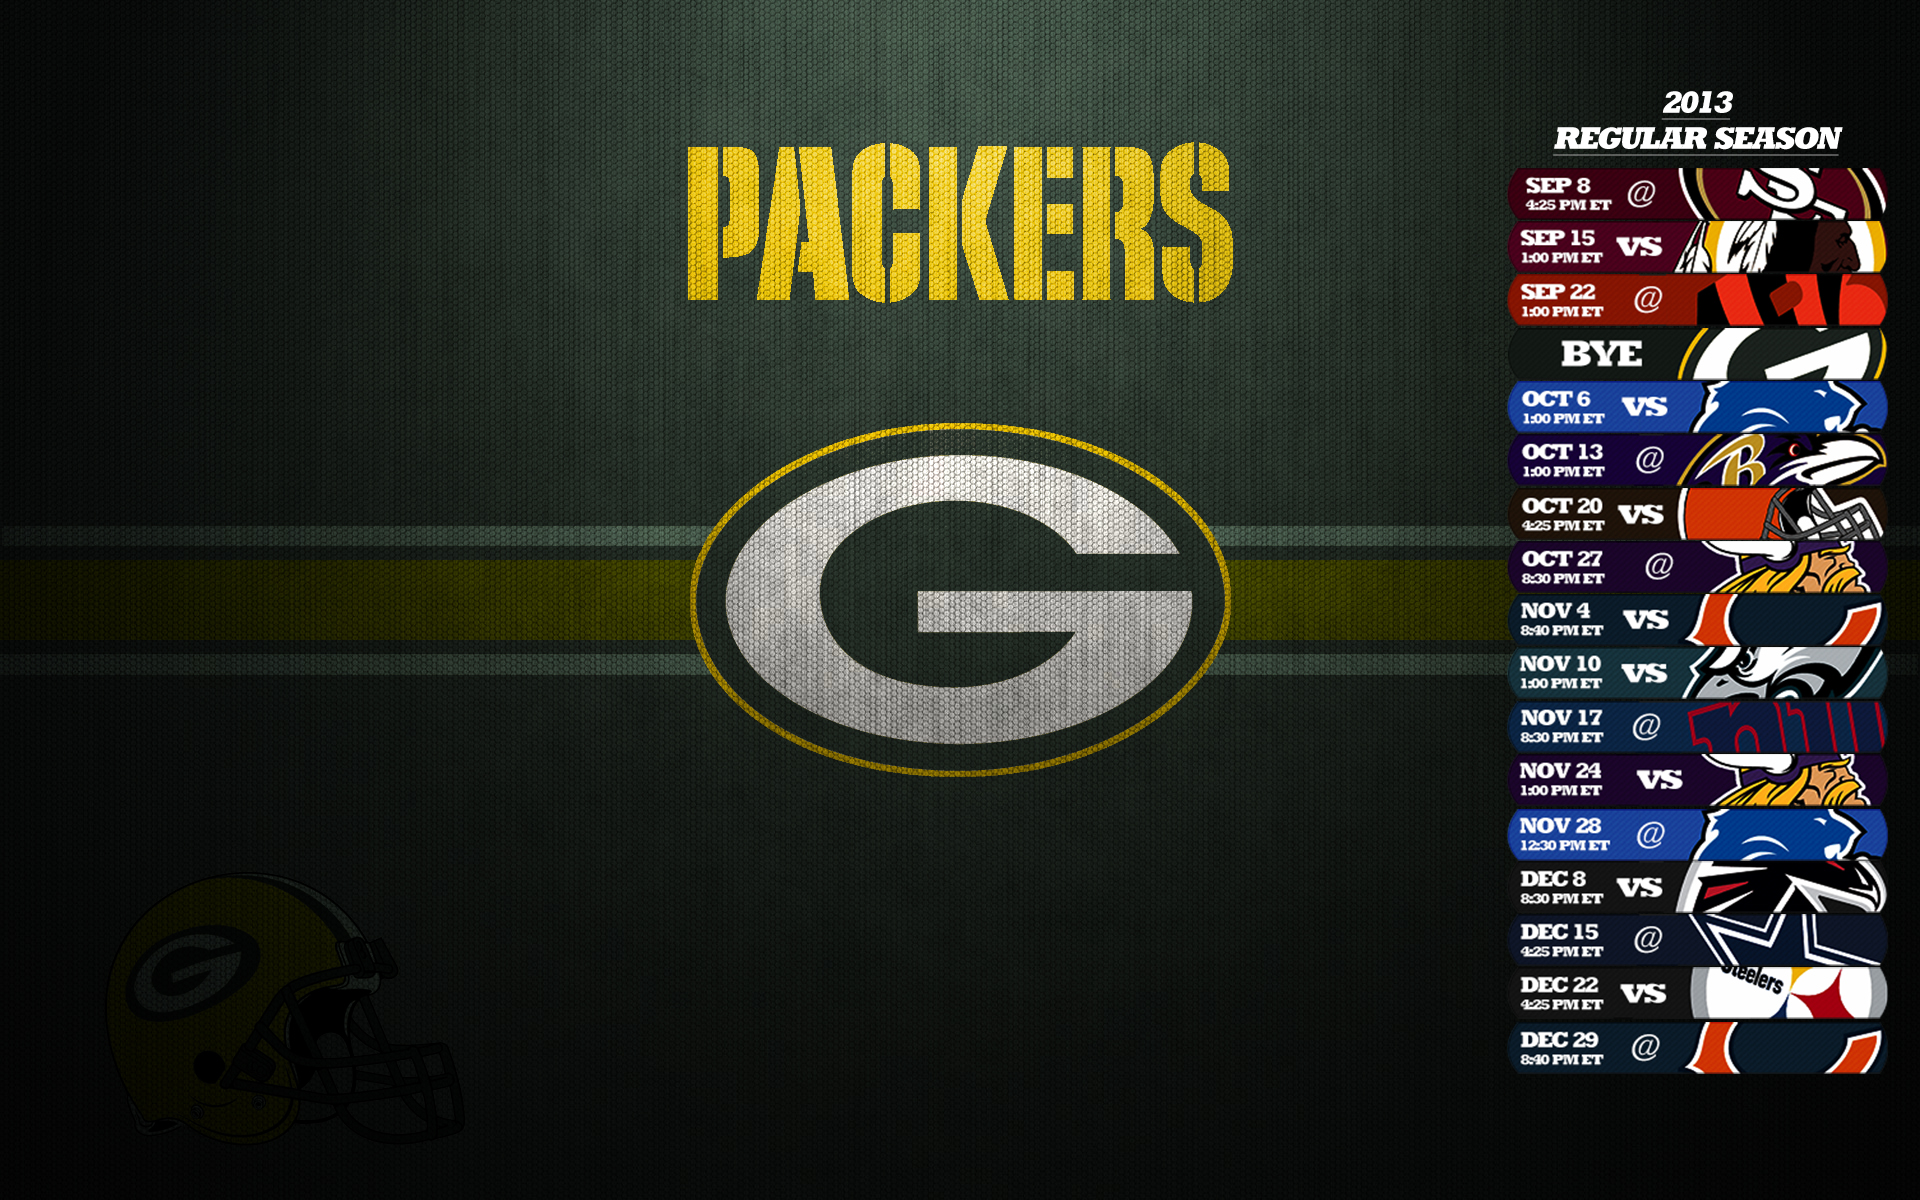 Green Bay Packers Image Schedule